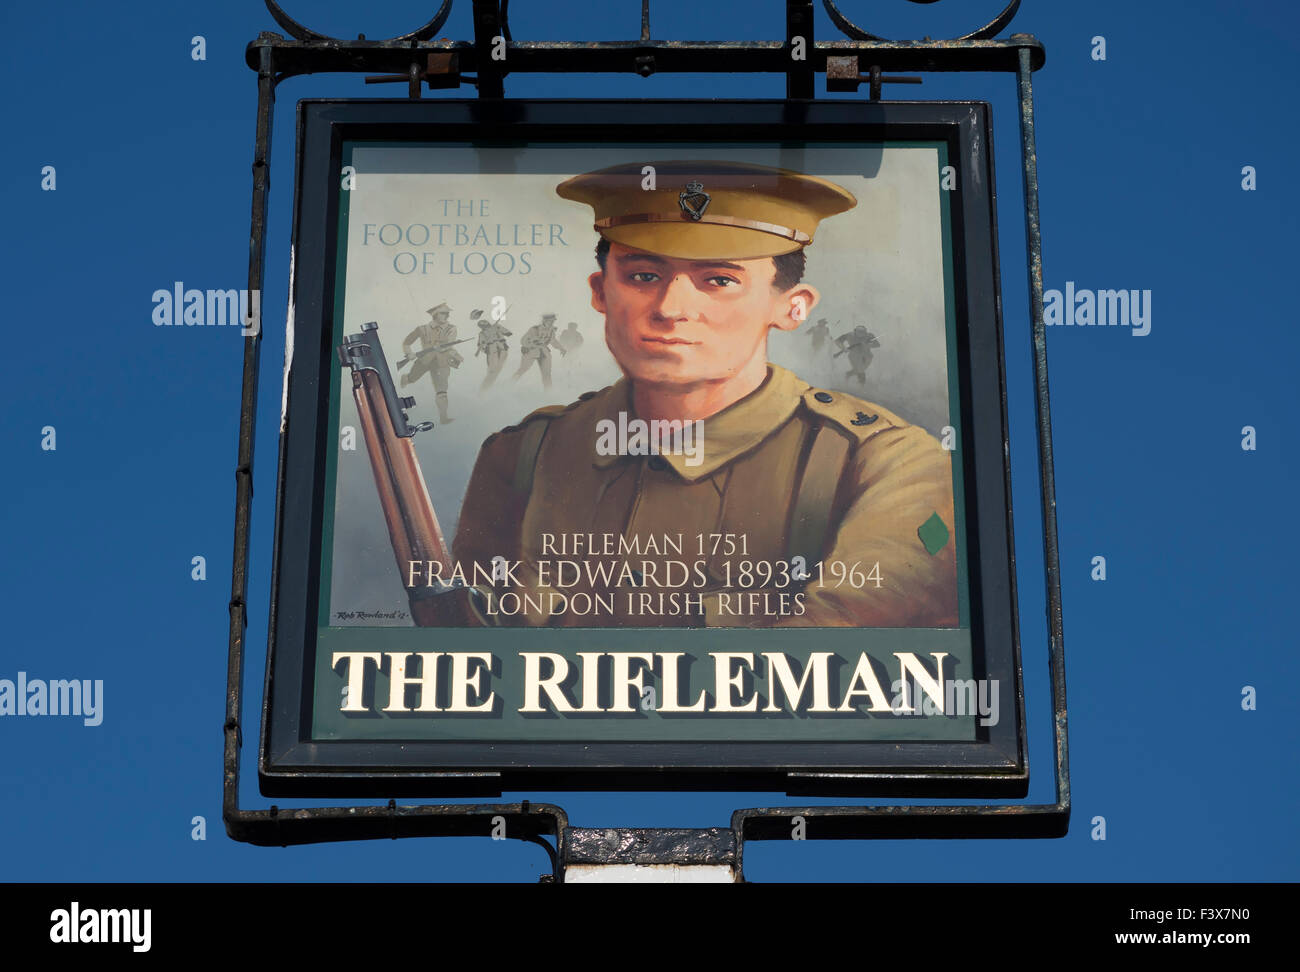 sign for the rifleman pub, twickenham, england, depicting frank edwards, the first world war 'footballer of loos' Stock Photo